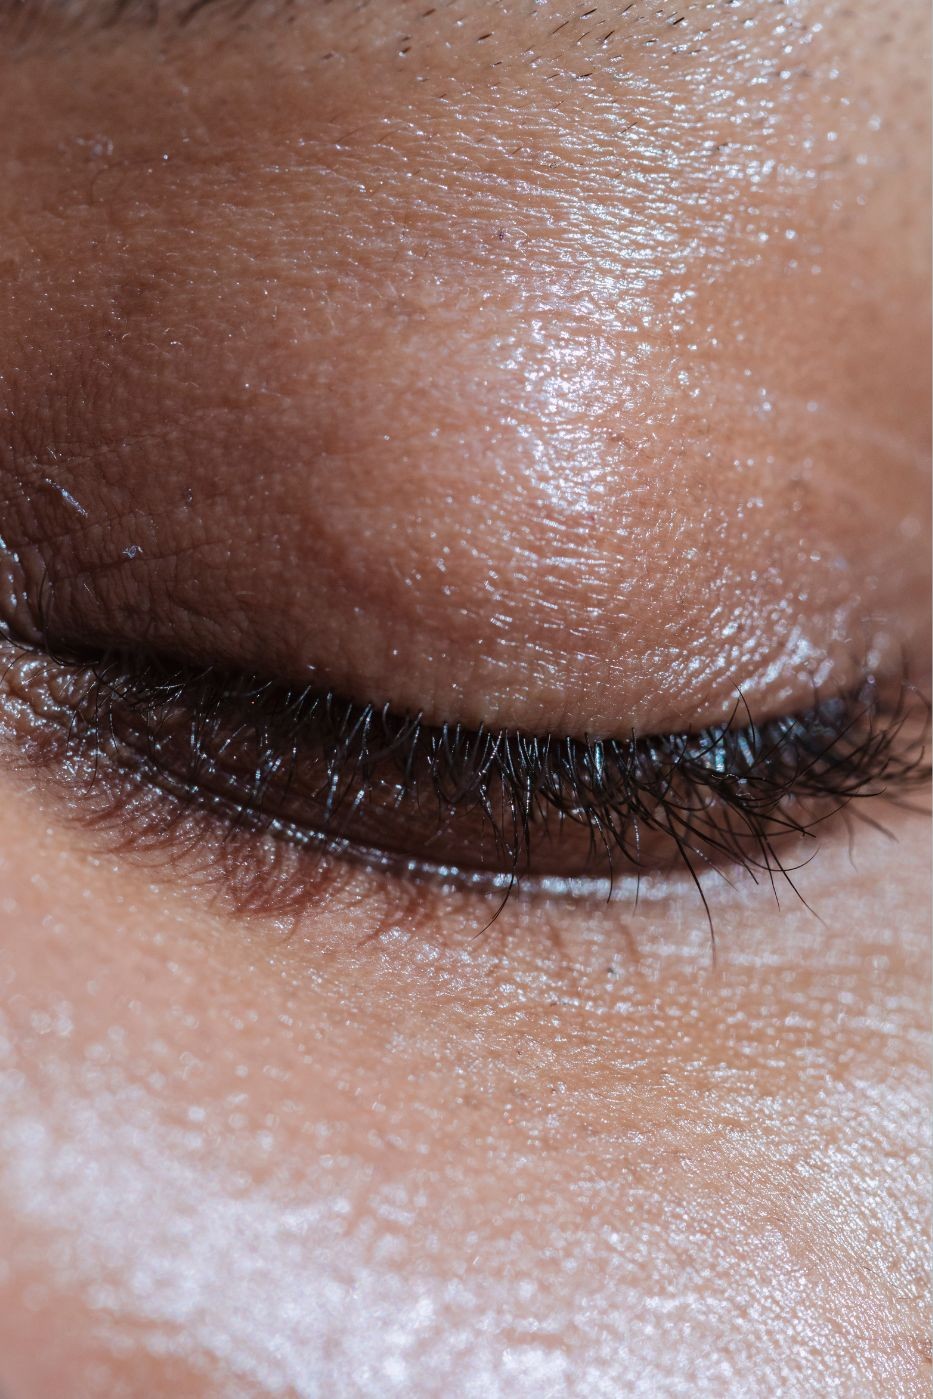 Lash serums help make eyelashes thicker and stronger.